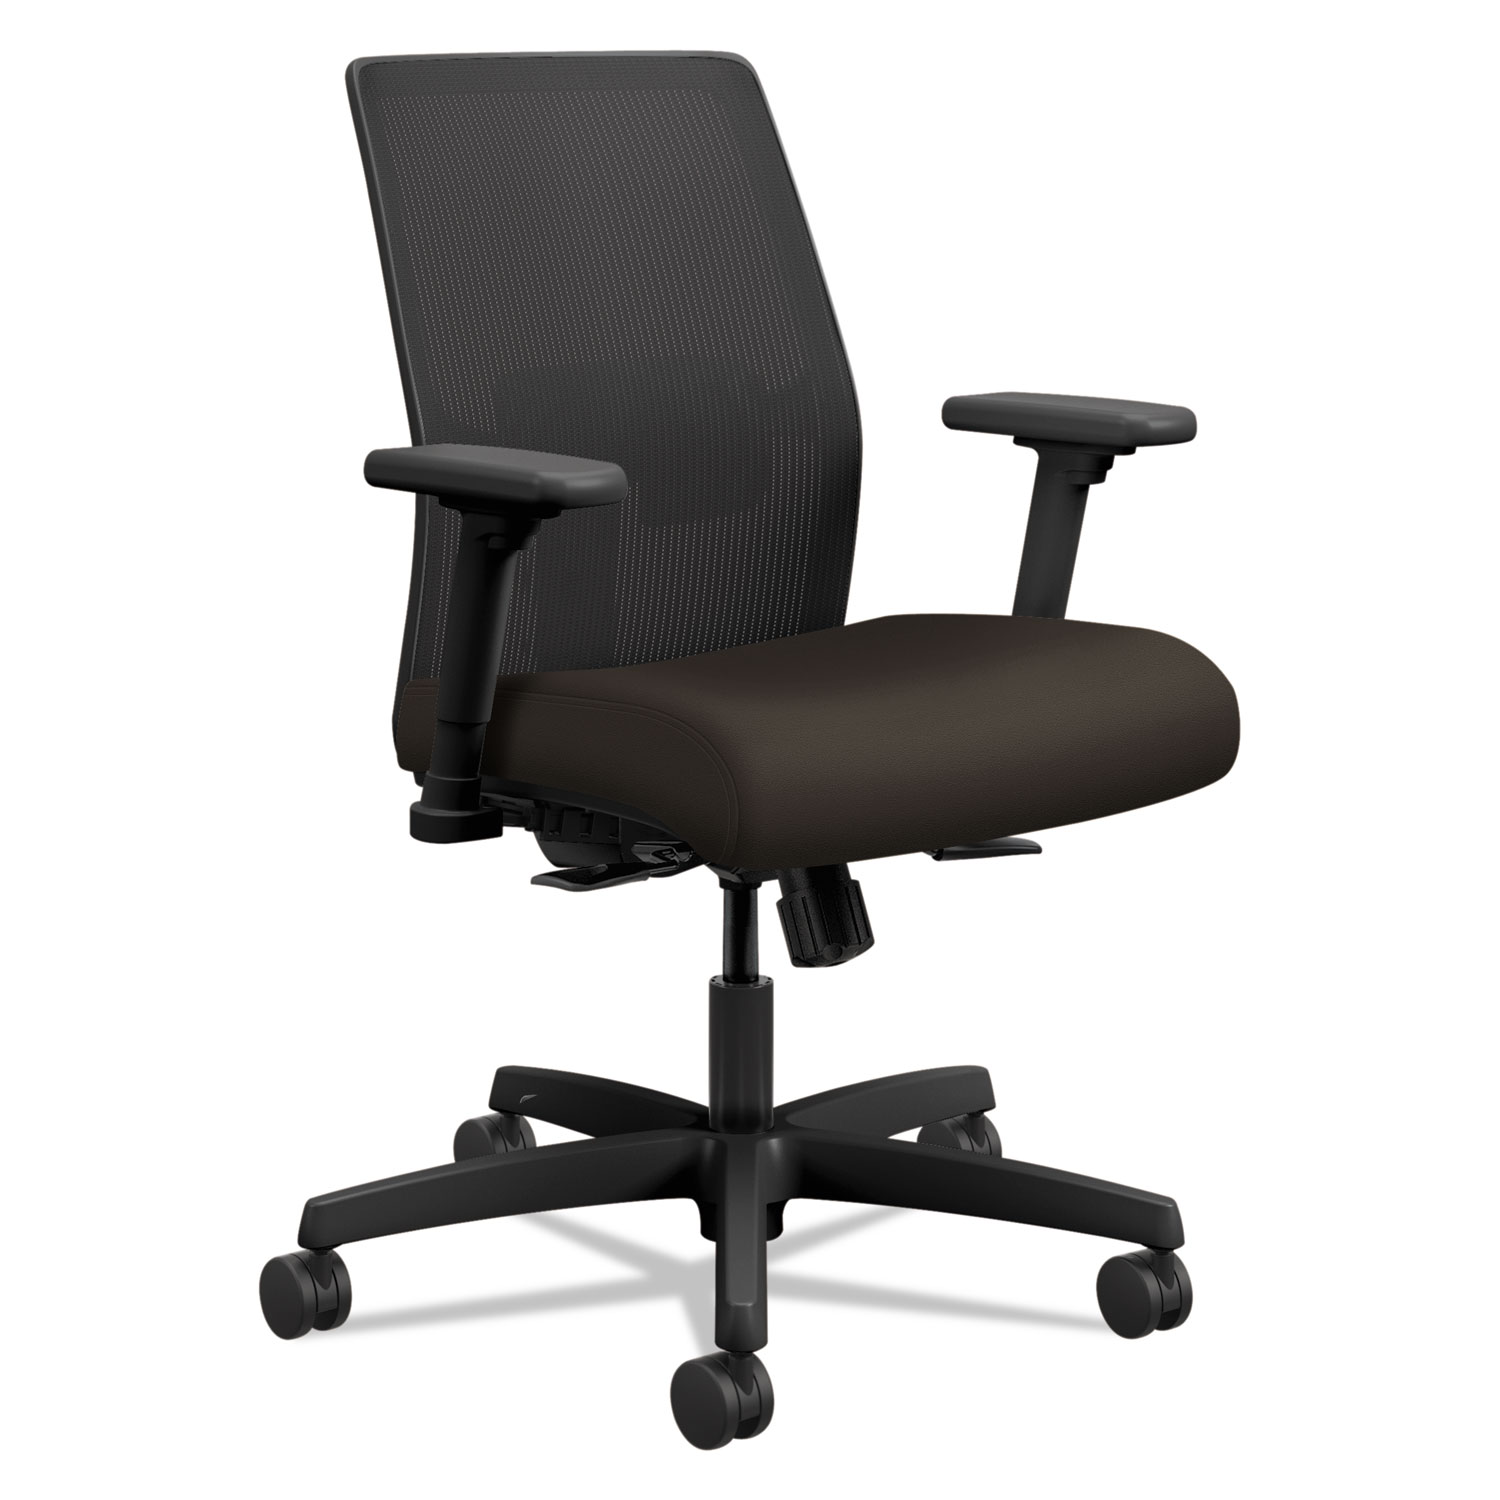  HON HONI2L1AMLC49TK Ignition 2.0 4-Way Stretch Low-Back Mesh Task Chair, Supports up to 300 lbs., Espresso Seat, Black Back/Base (HONI2L1AMLC49TK) 